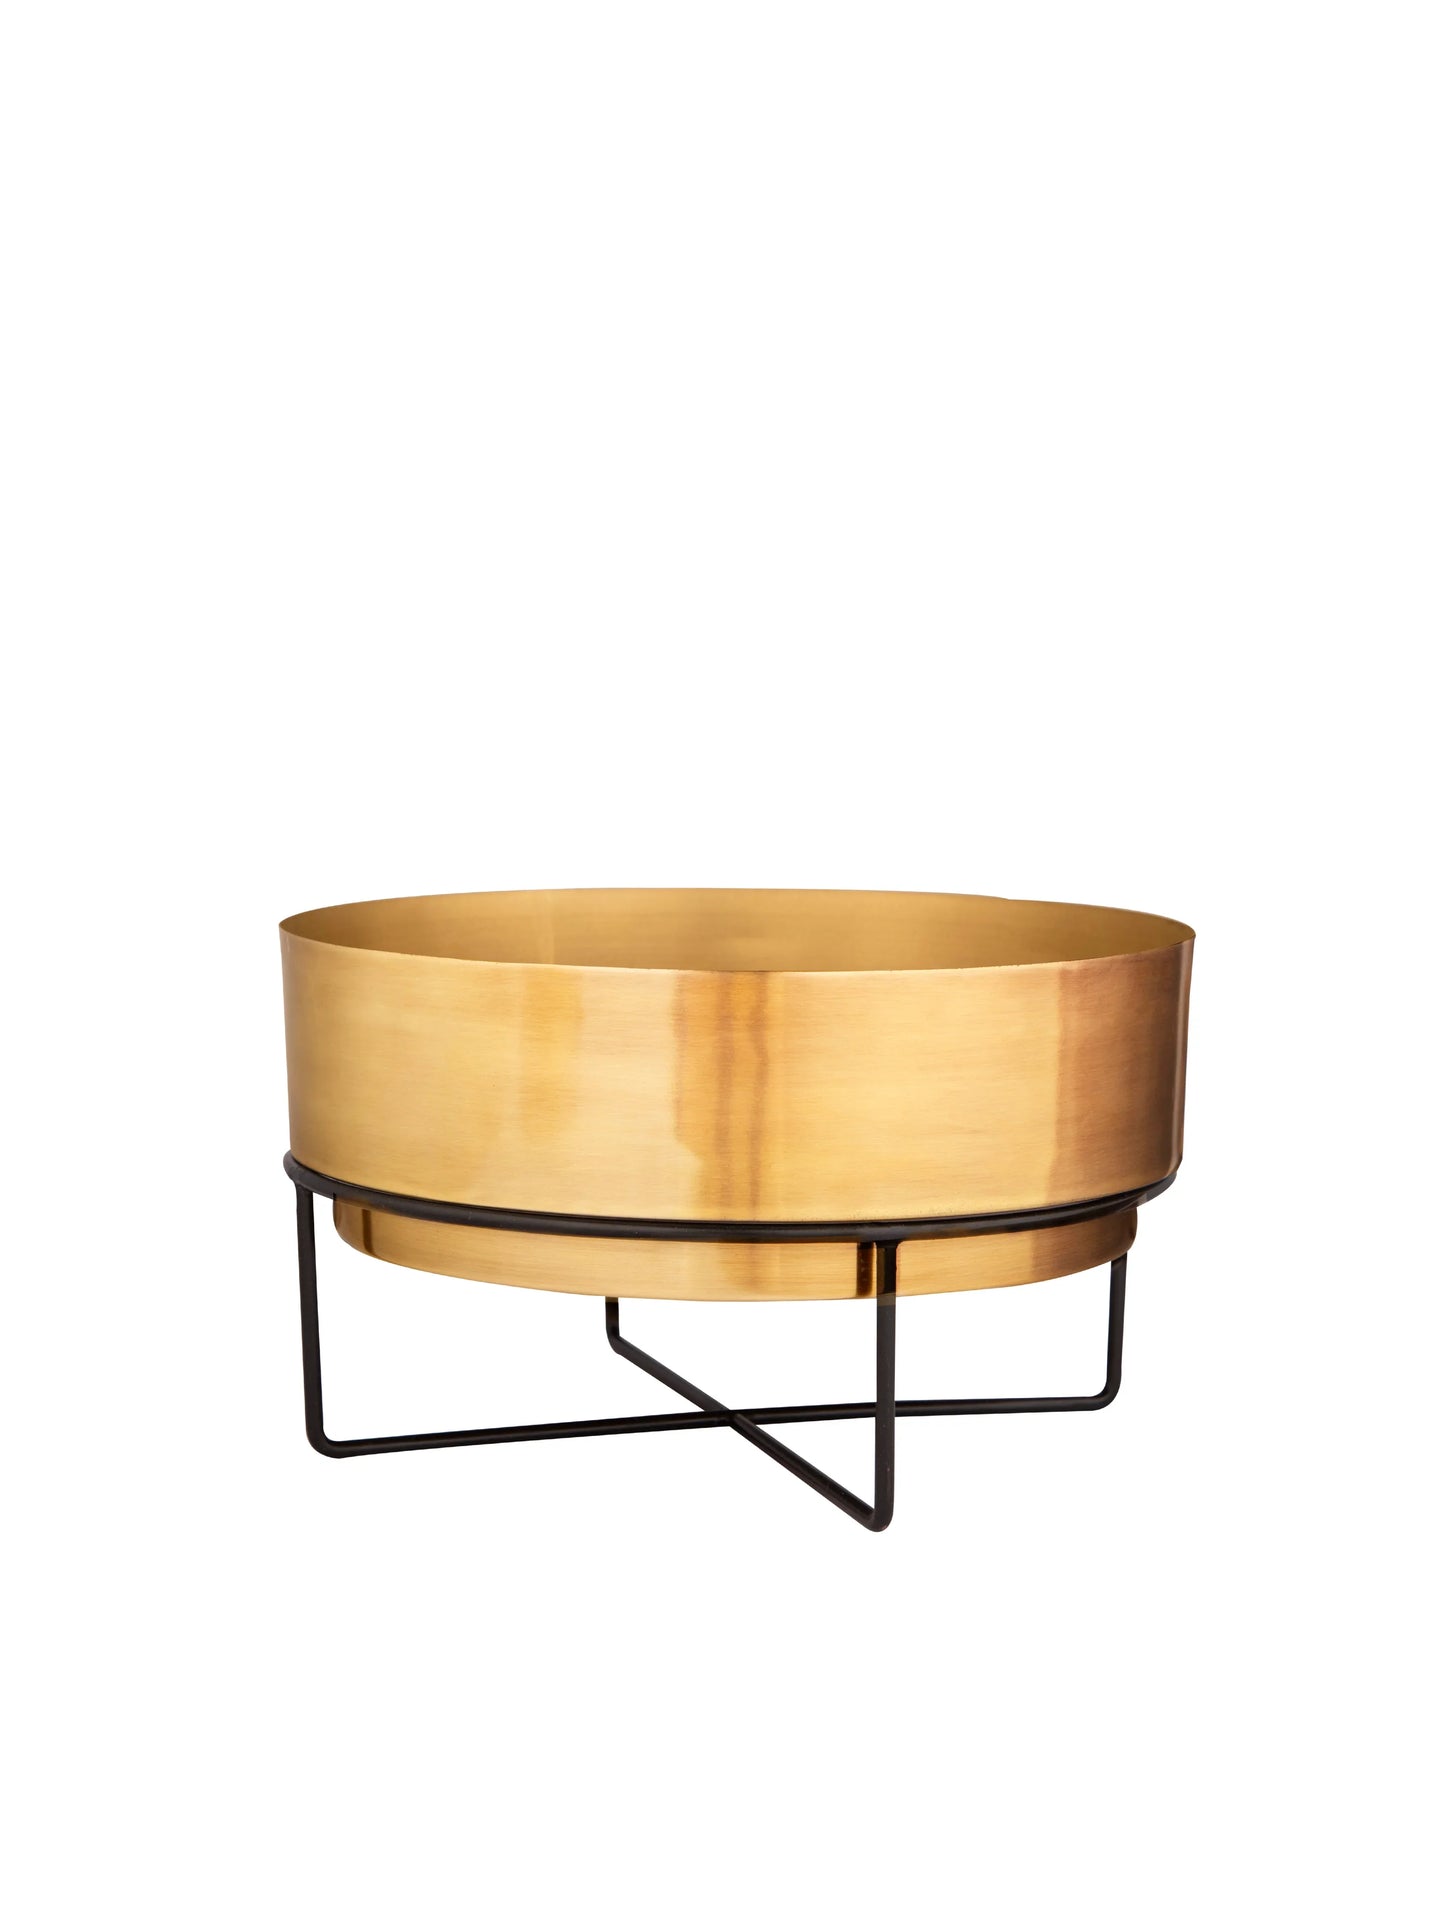 Golden Planter Pot with Black Metal Stand